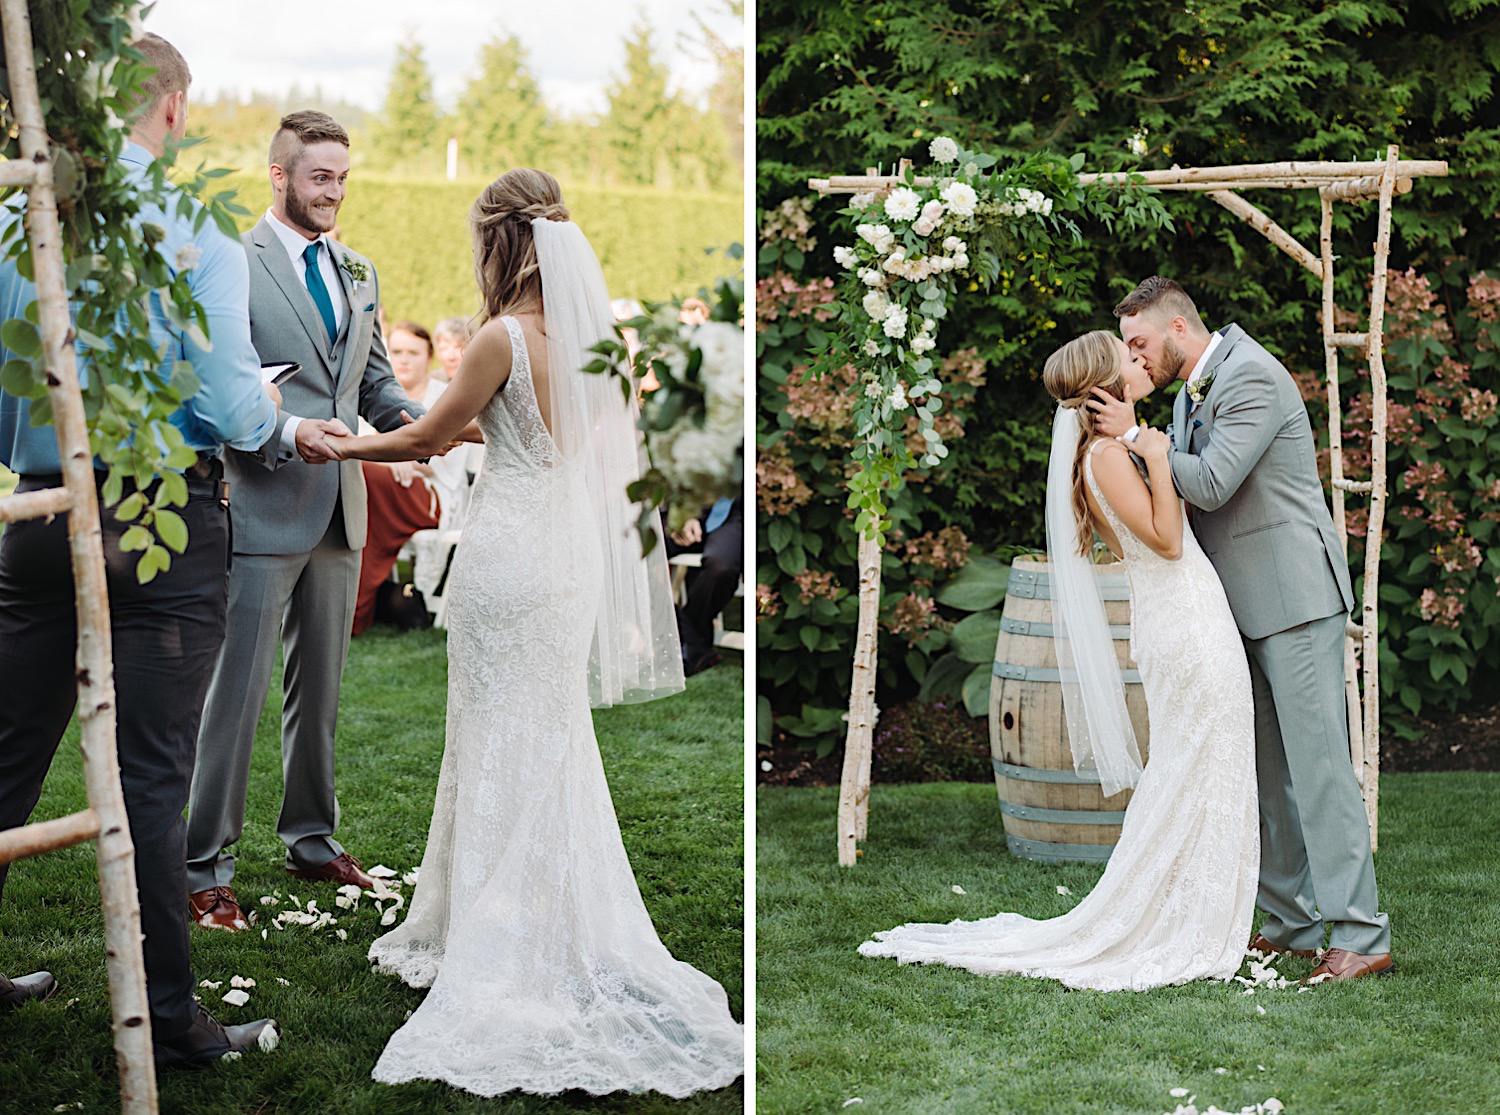 couple sharing their first kiss in an outdoor ceremony at Pine Creek Farms and Nursery in Monroe, Washington